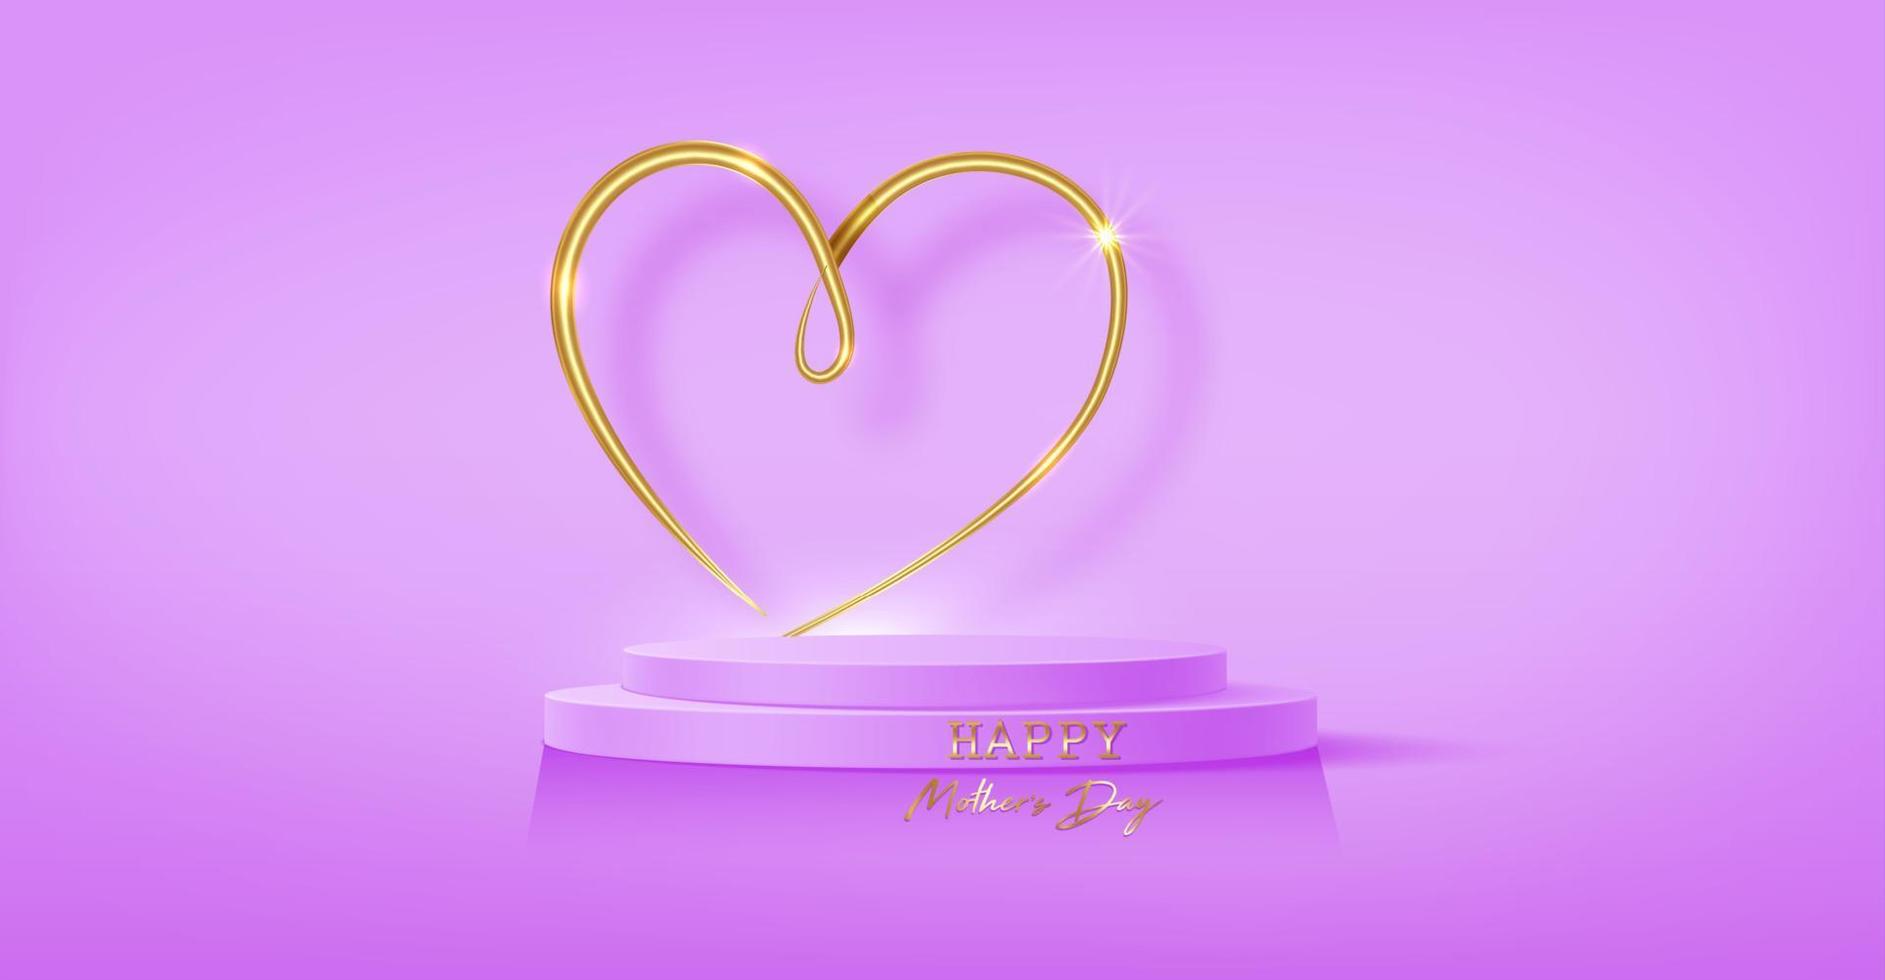 Mother's Day banner, 3d stage podium decorated with gold heart shape lighting. Pedestal scene for product, advertising, show, award ceremony, on pink background. Minimal style. Vector illustration